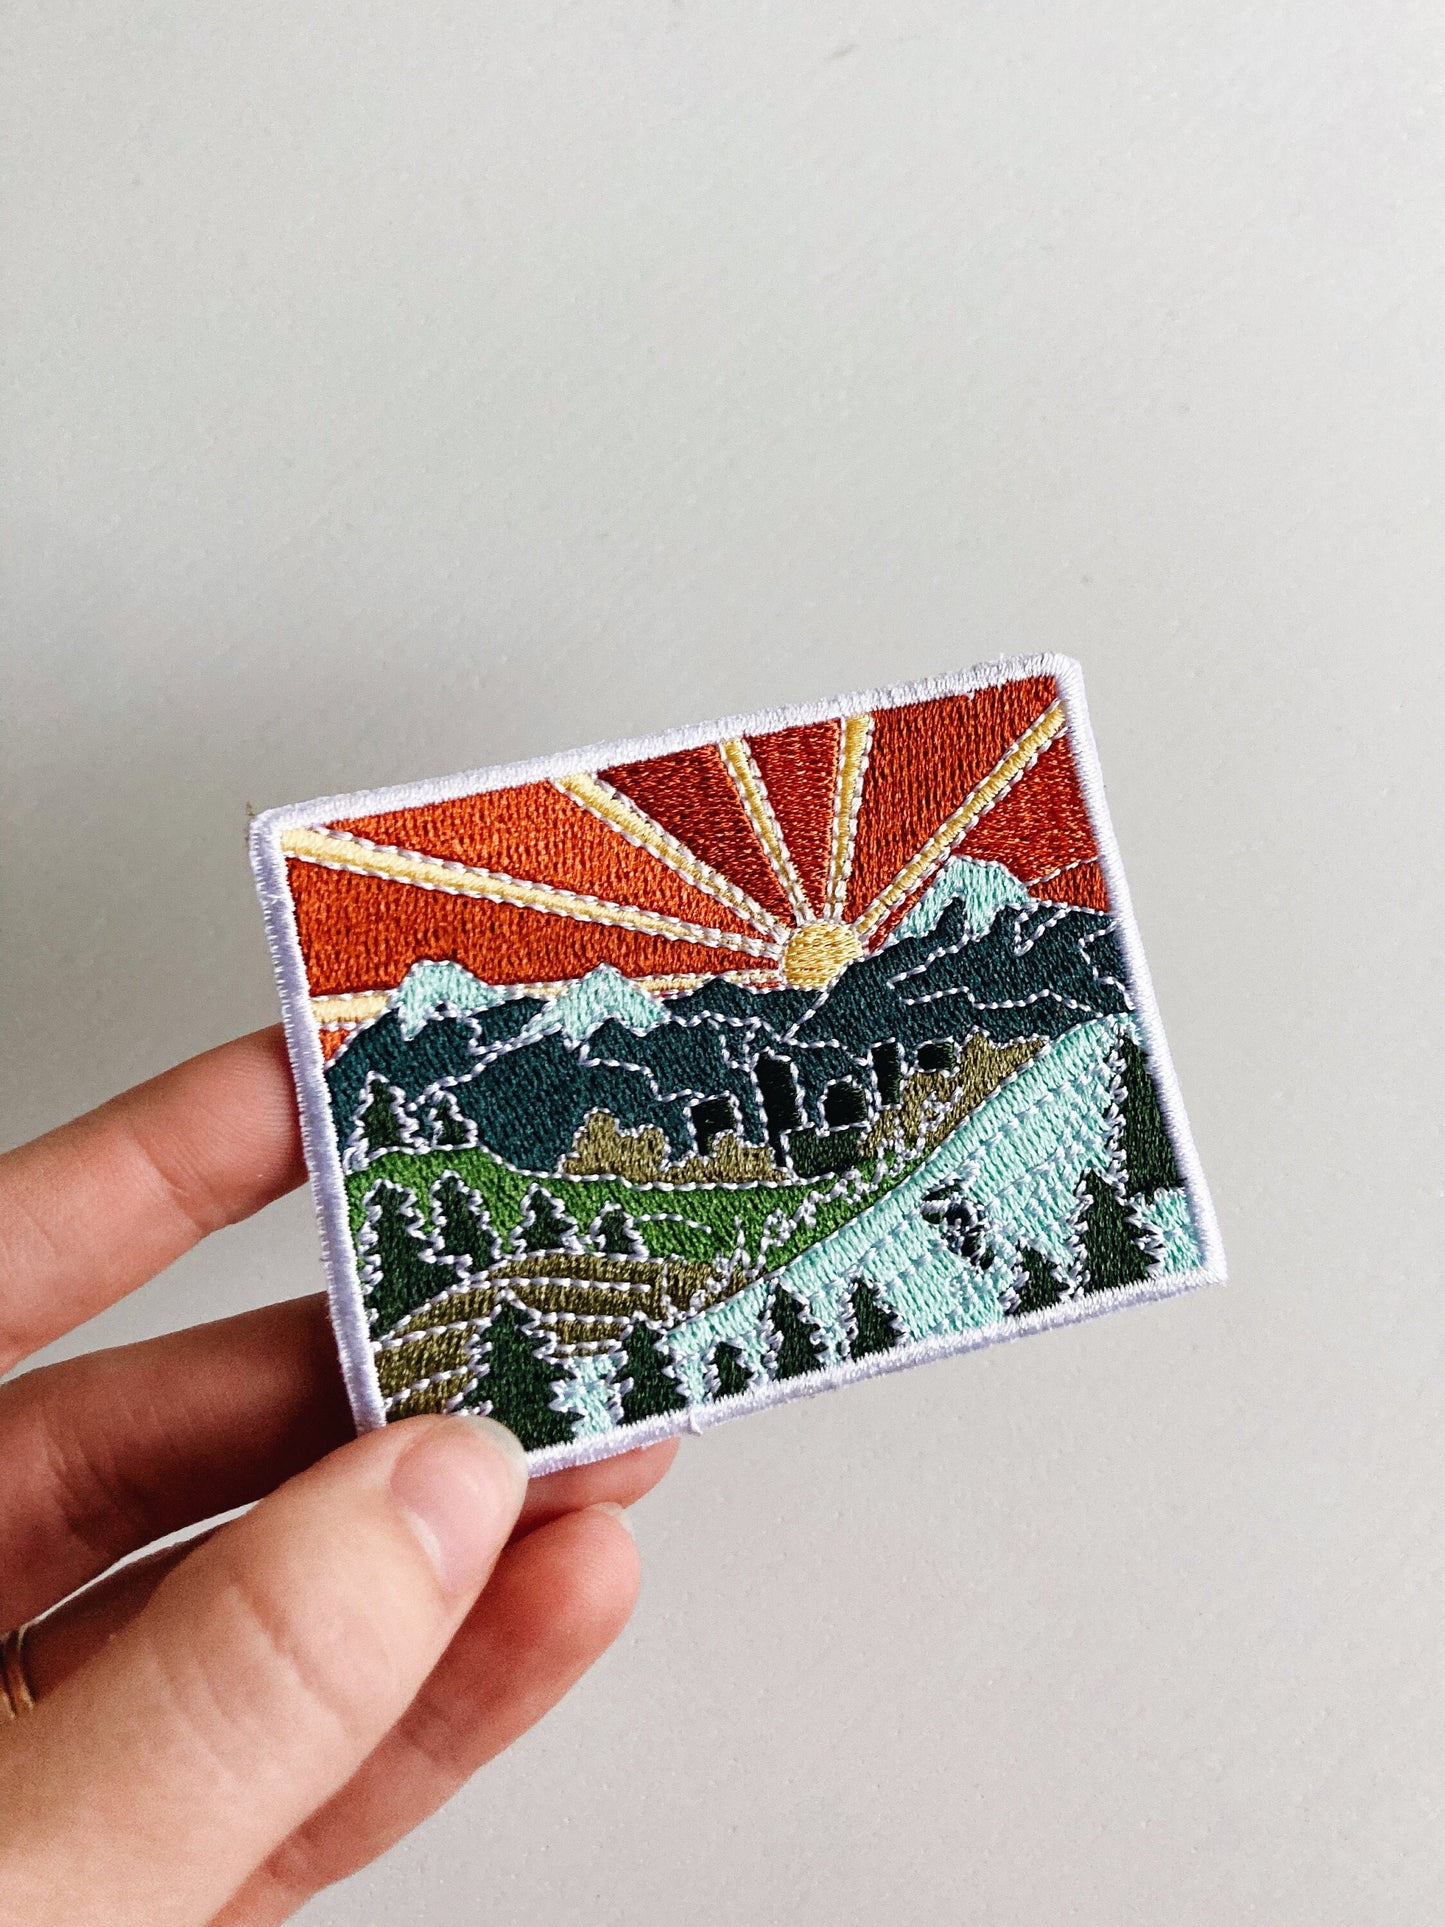 Colorado Iron-On Patch | 3" Patch | Embroidered Sew-on or Iron-on Applique